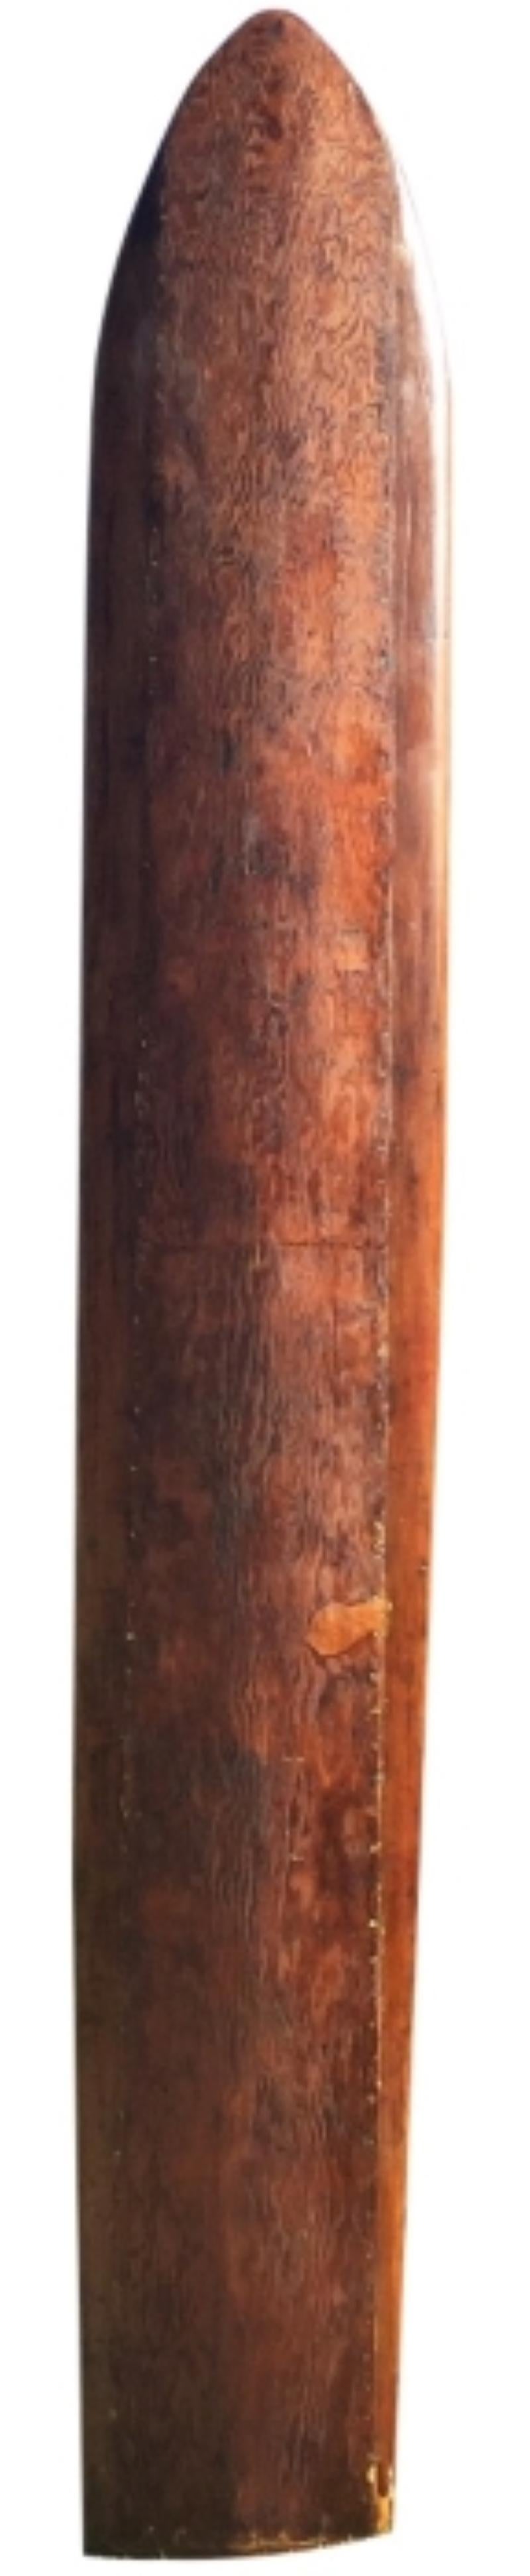 Mid-late 1930's Phillip “Flippy” Hoffman personal redwood surfboard which measures 11' 10